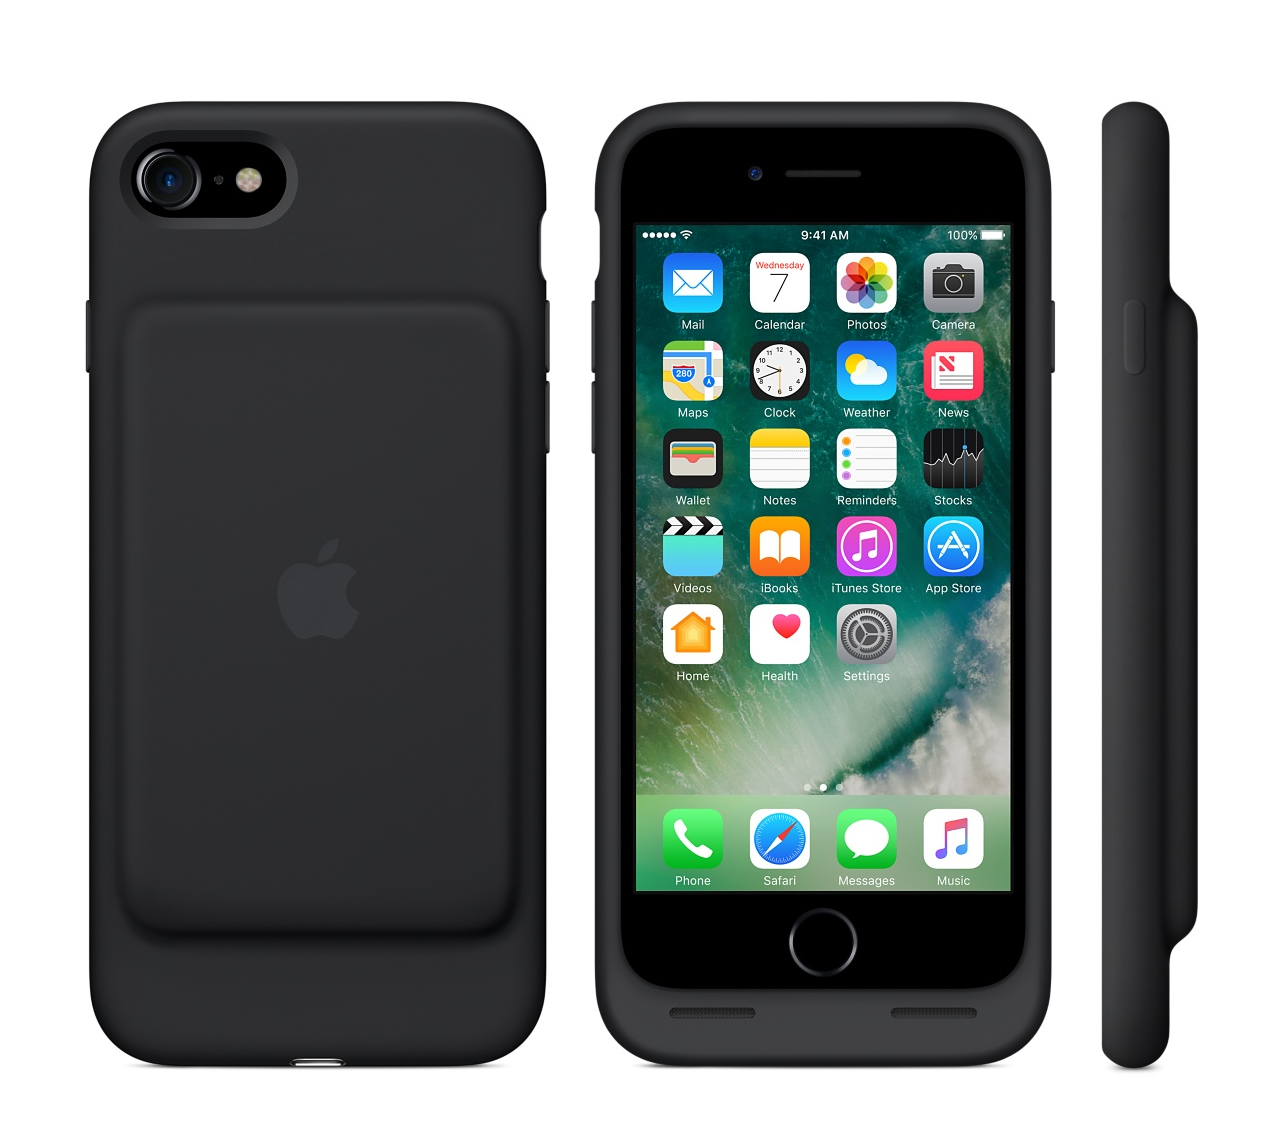 iPhone 7の充電バッテリー付きスマホカバー「Smart Battery Case」の電池容量がアップして発売！